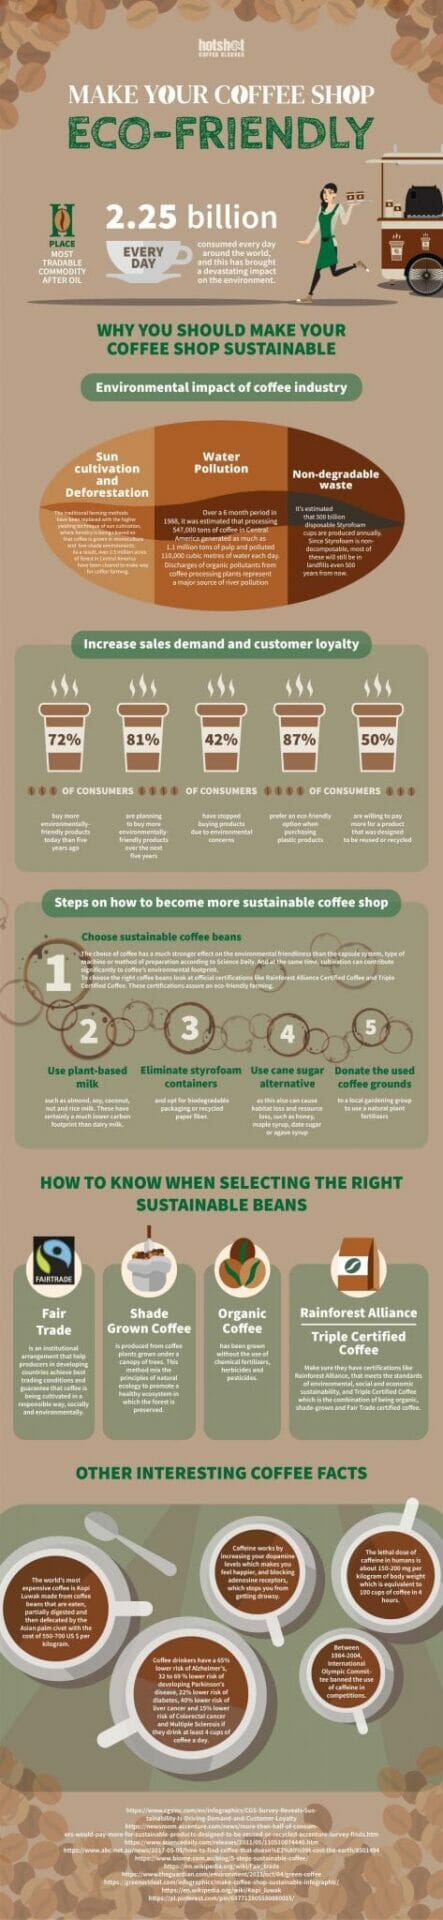 make your coffee shop eco friendly and sustainable infographic